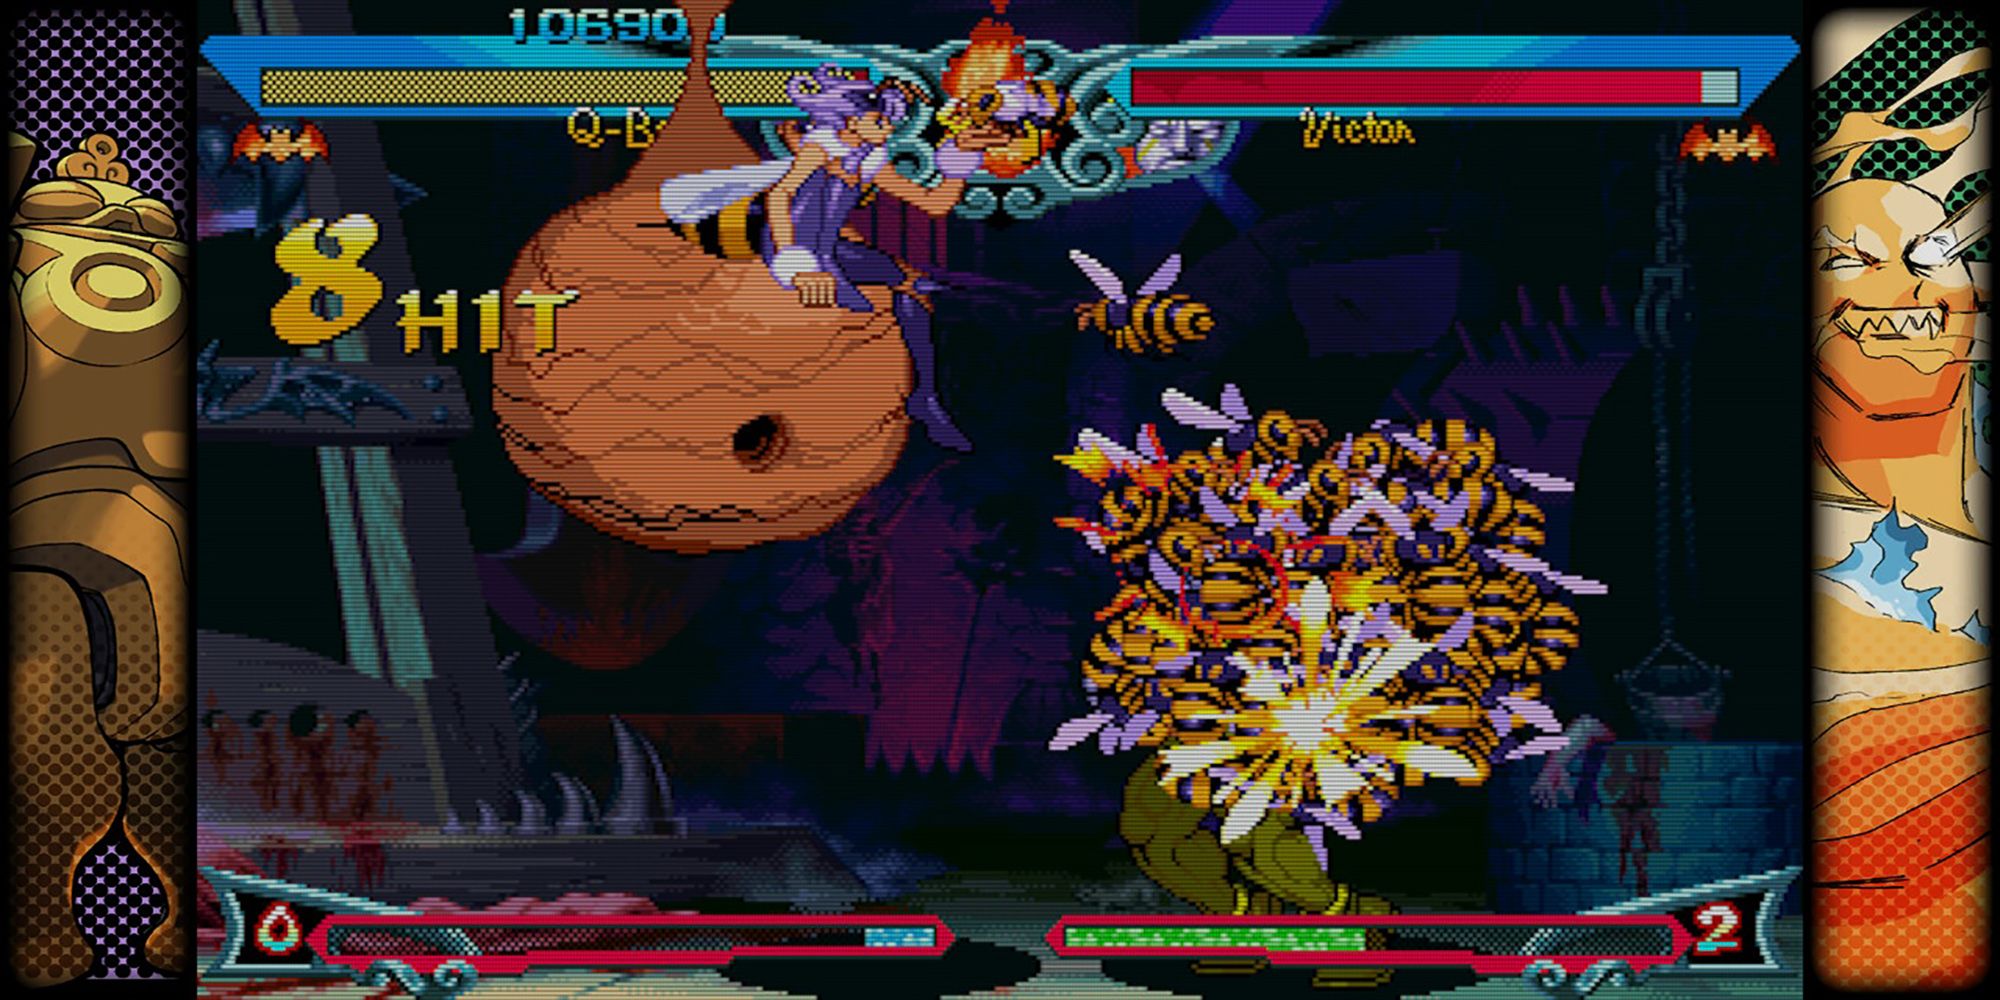 Q-Bee B+ sends a swarm of bees to sting Victor to death while fighting in a torture chamber in Vampire Savior 2, a game in Capcom Fighting Collection.